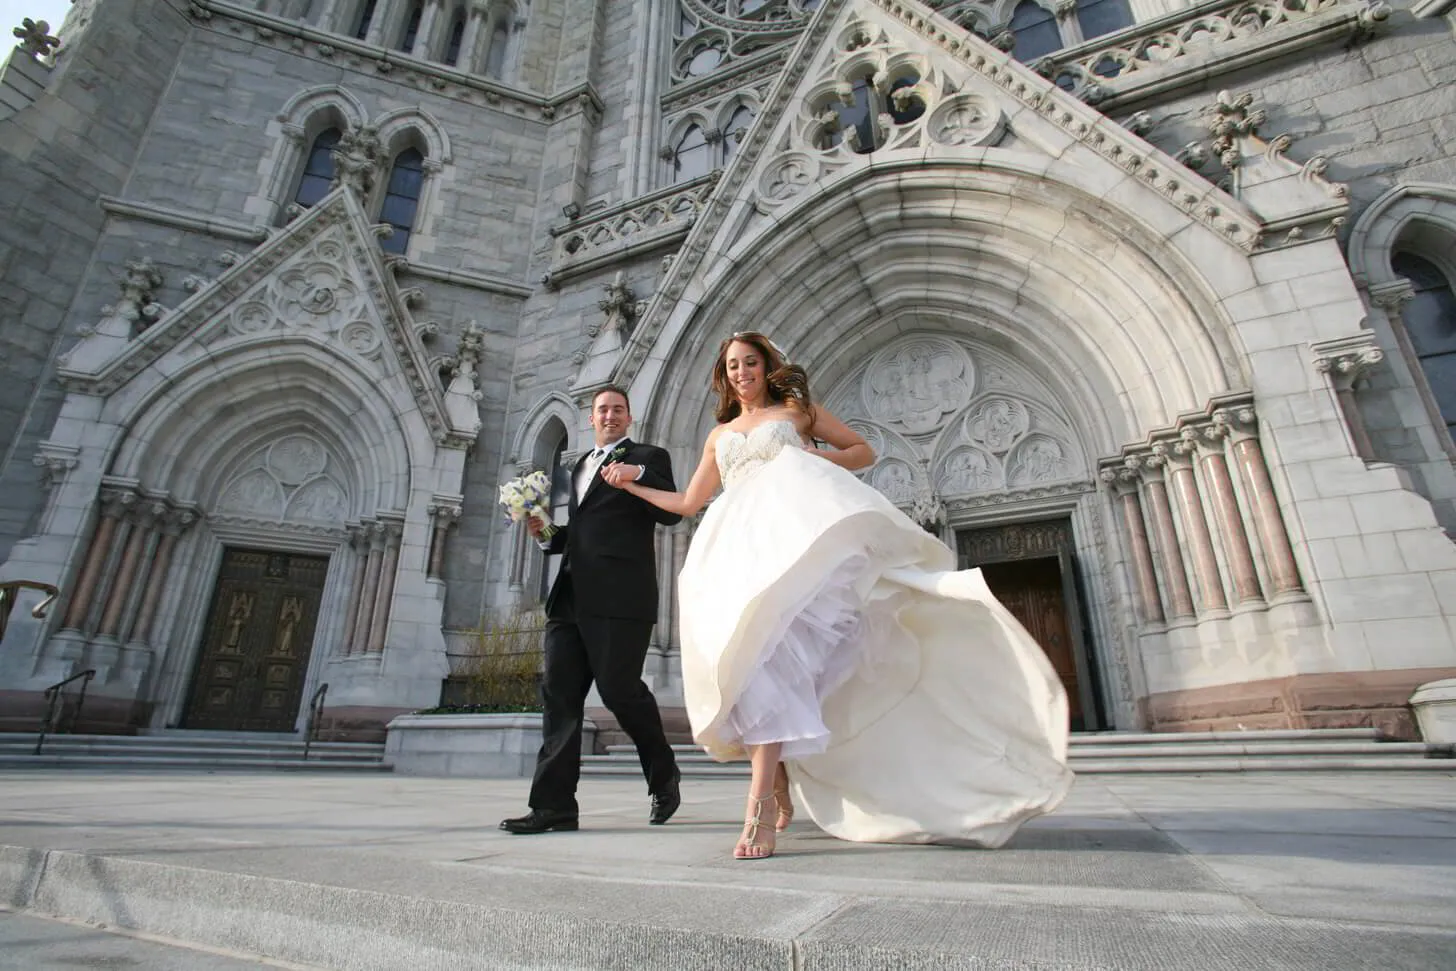 WEDDING event photographer services in los angeles